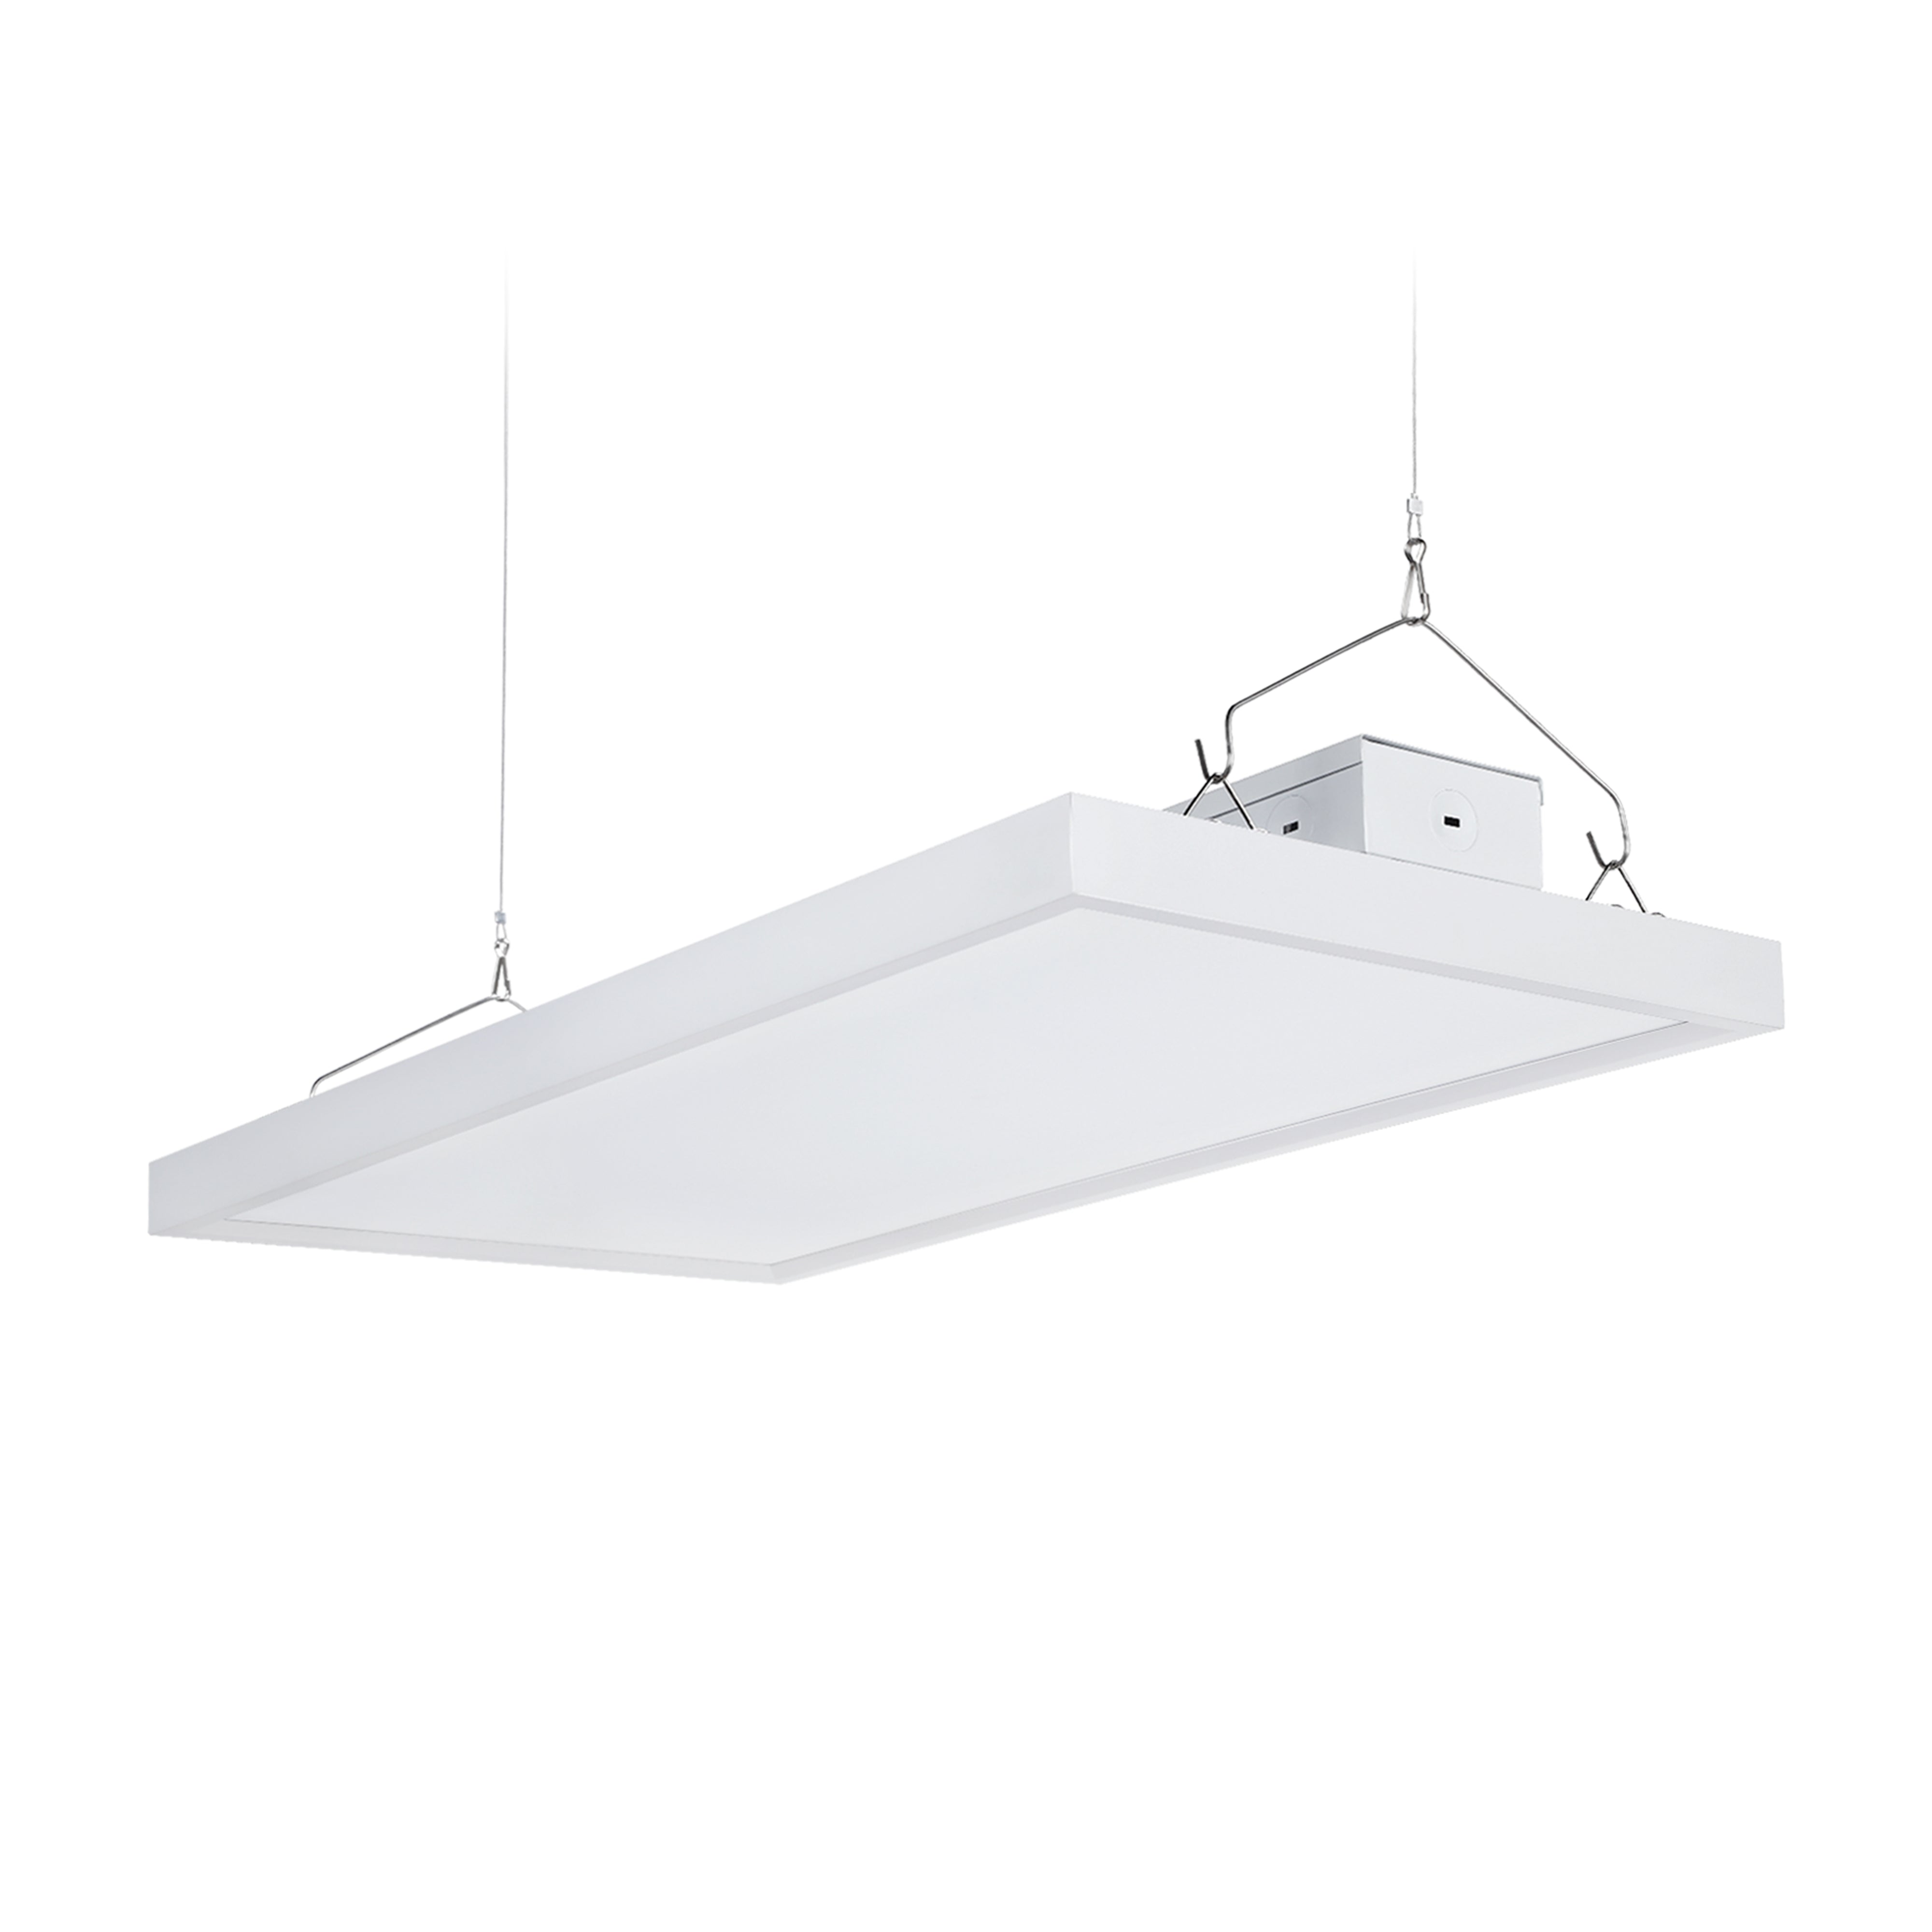 PowerWave 110W LED High Bay Linear Fixtures